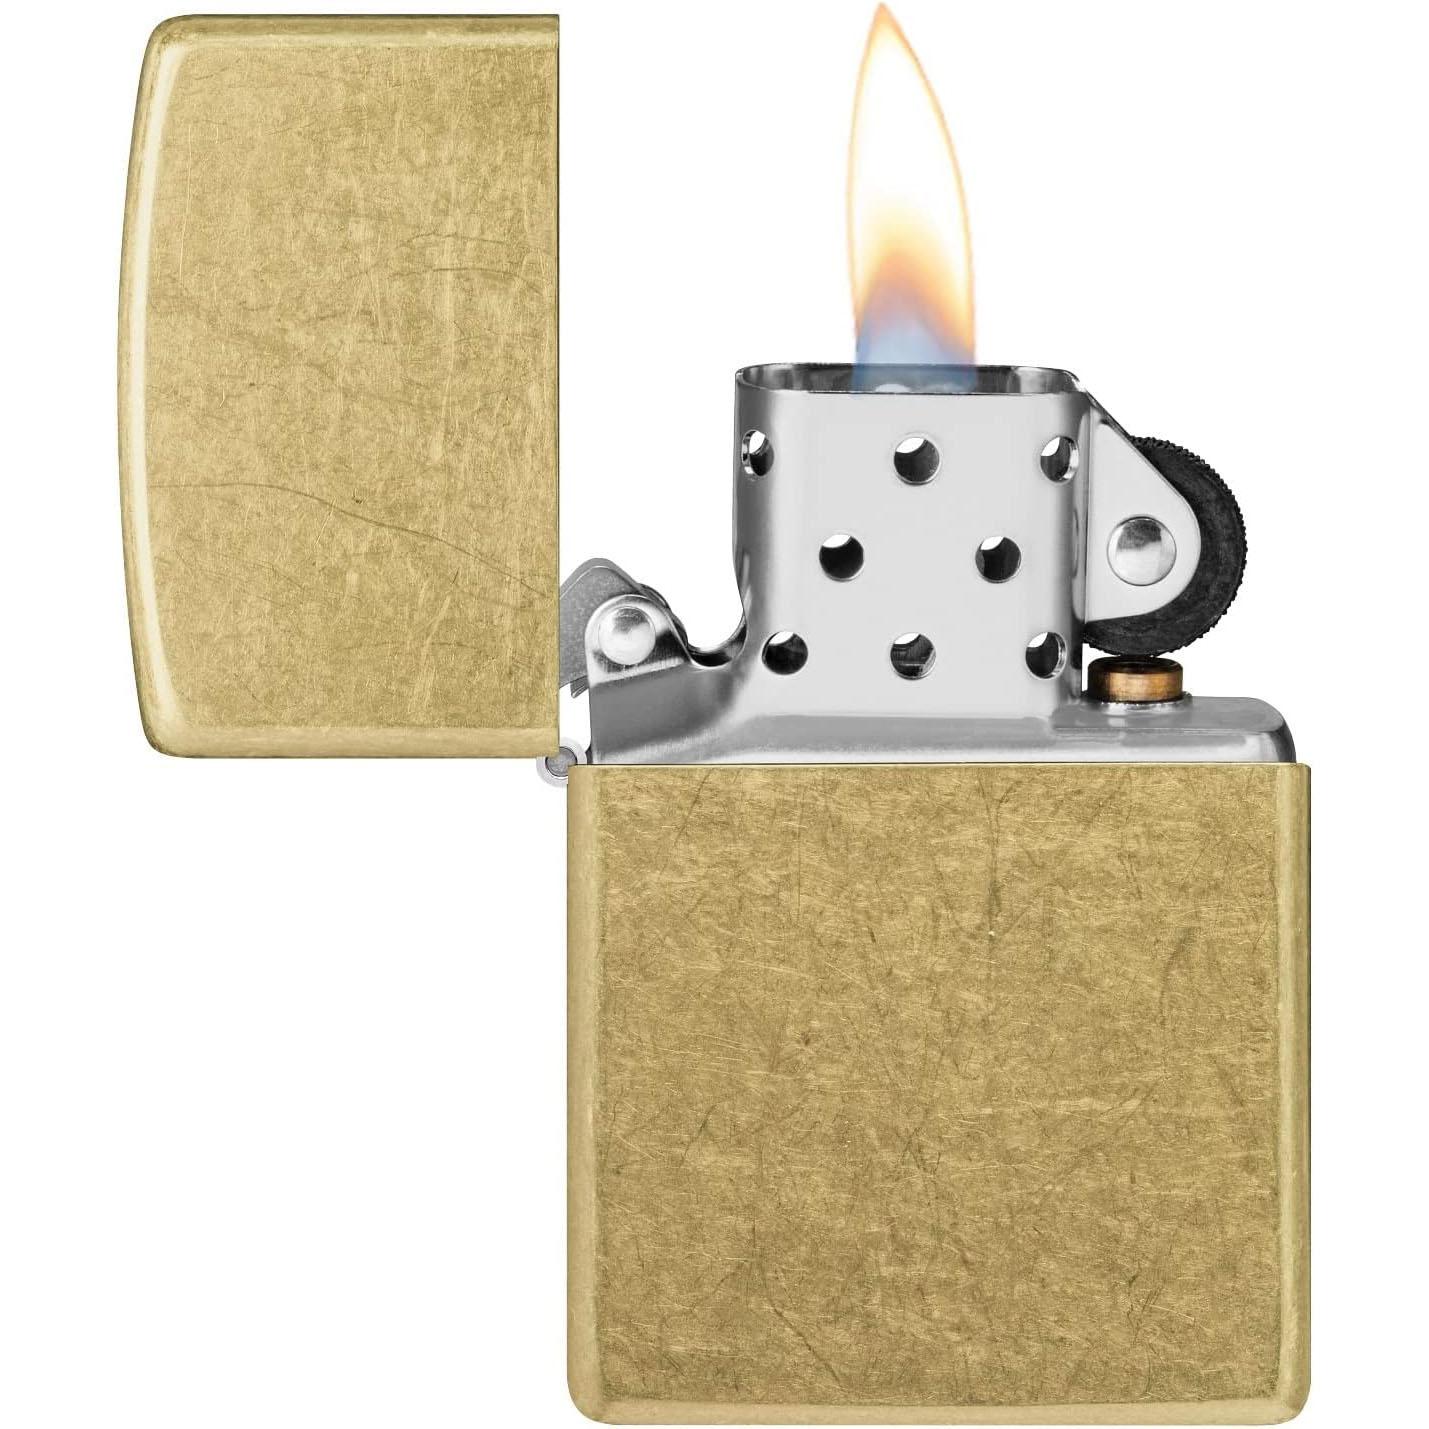 Zippo Classic Windproof Pocket Lighter for $10.97